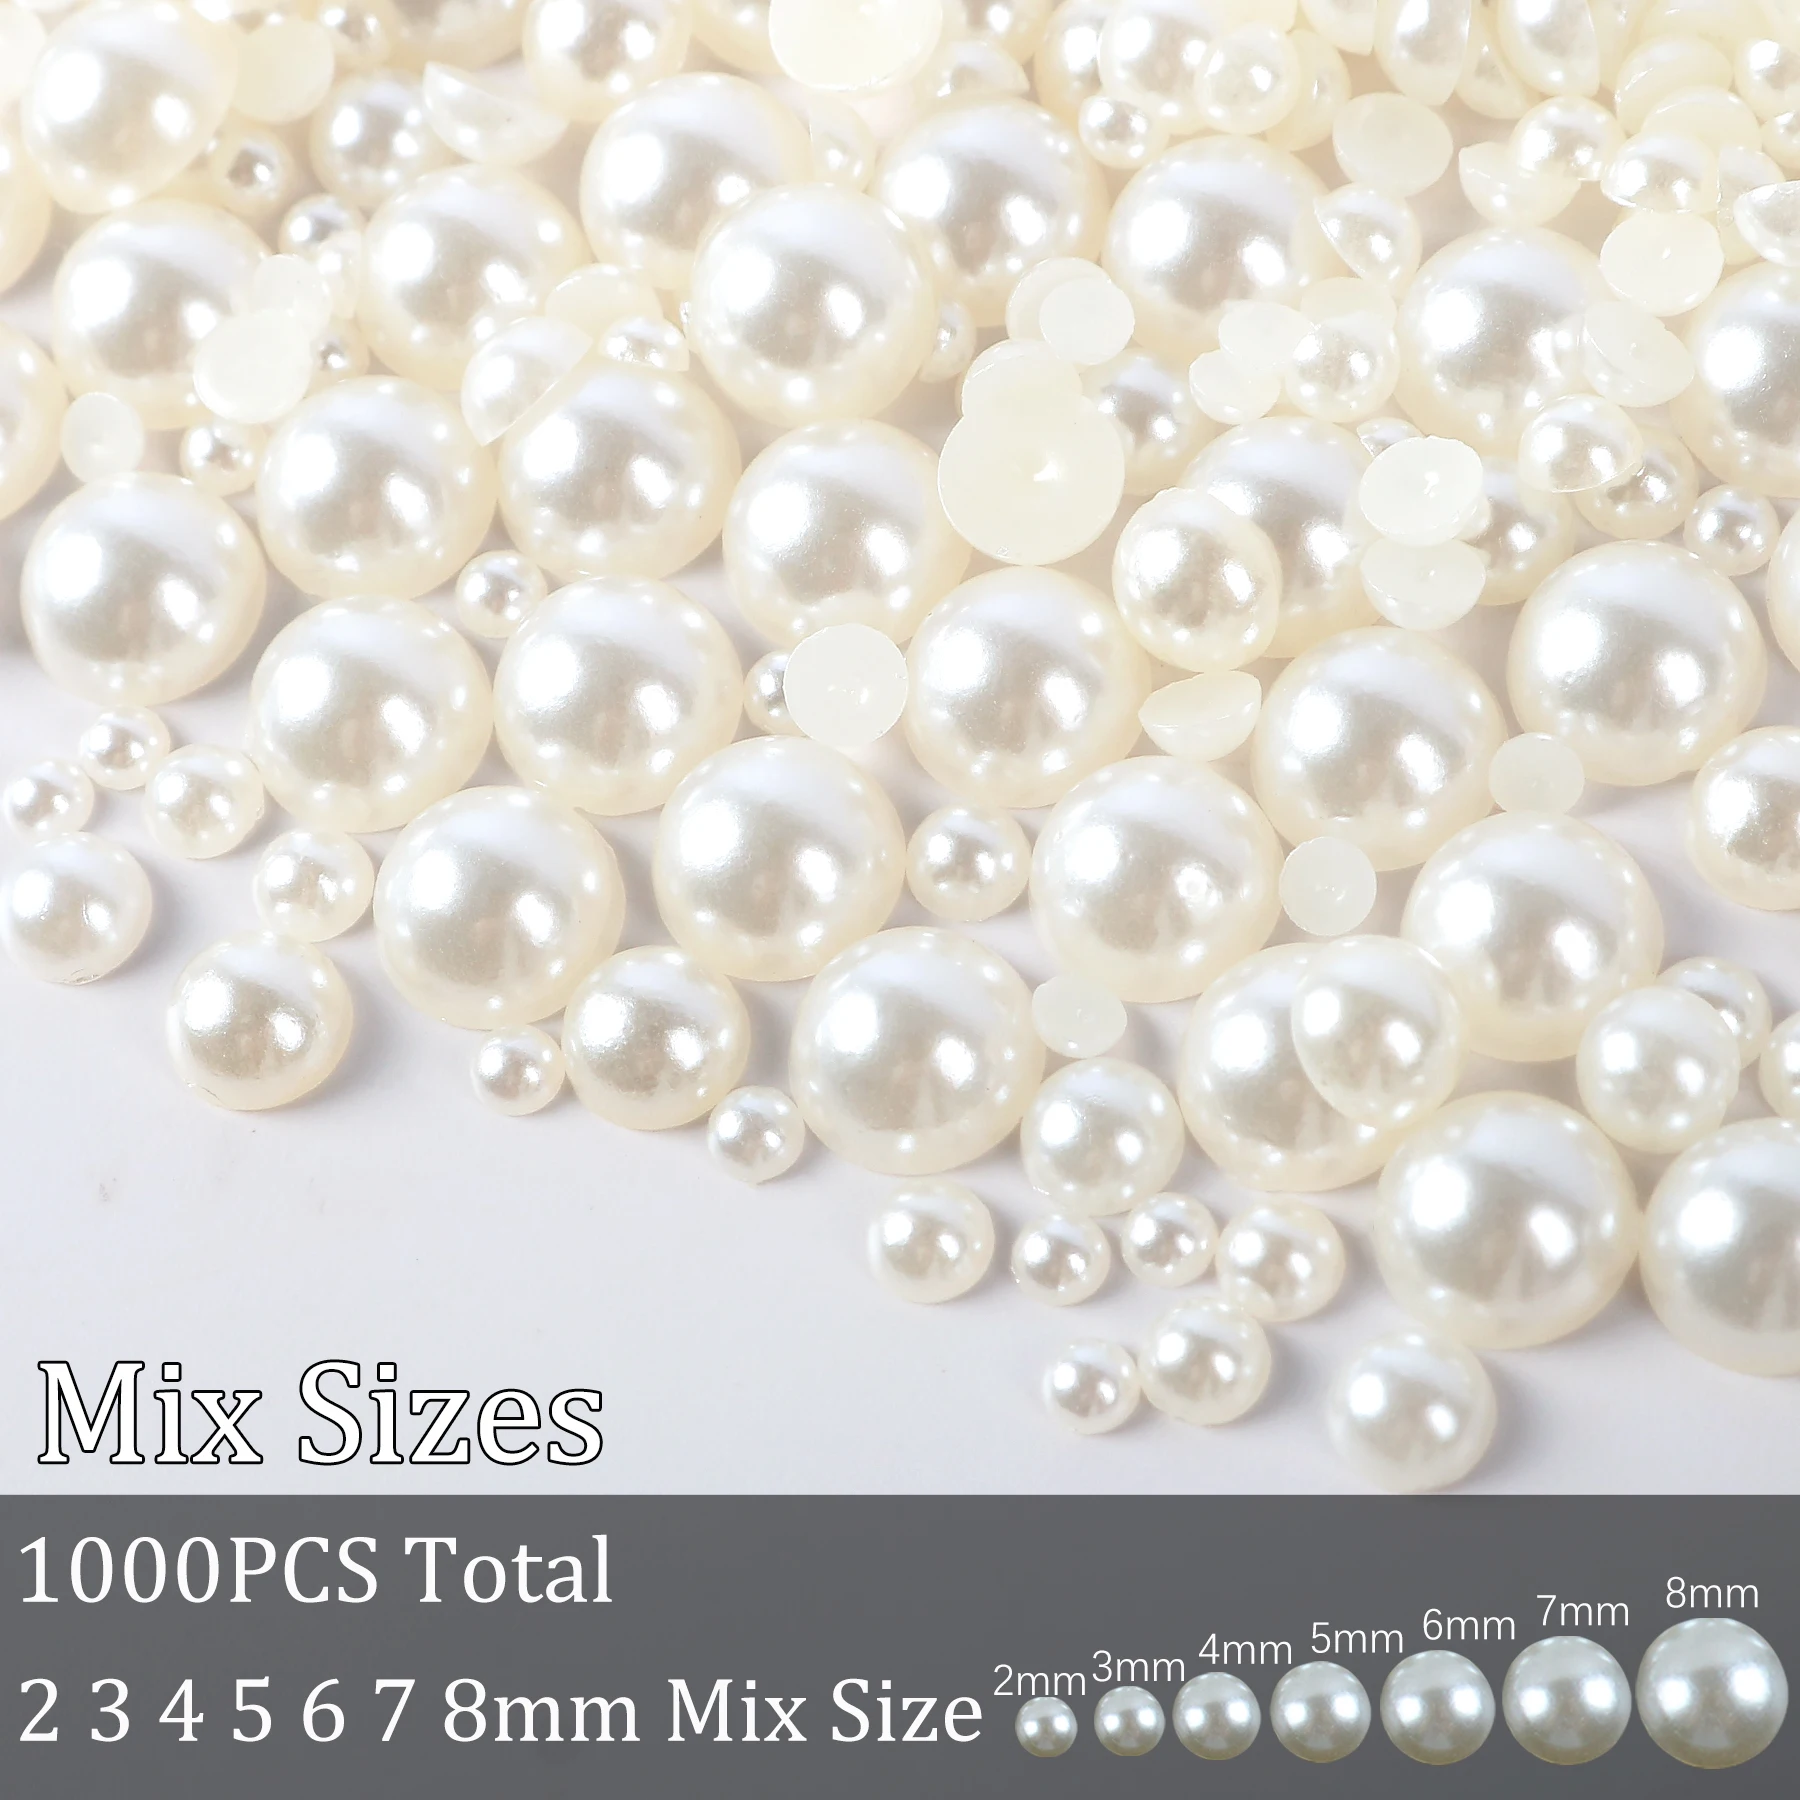 Cream Faux Pearls - 20 mm Fake Pearls